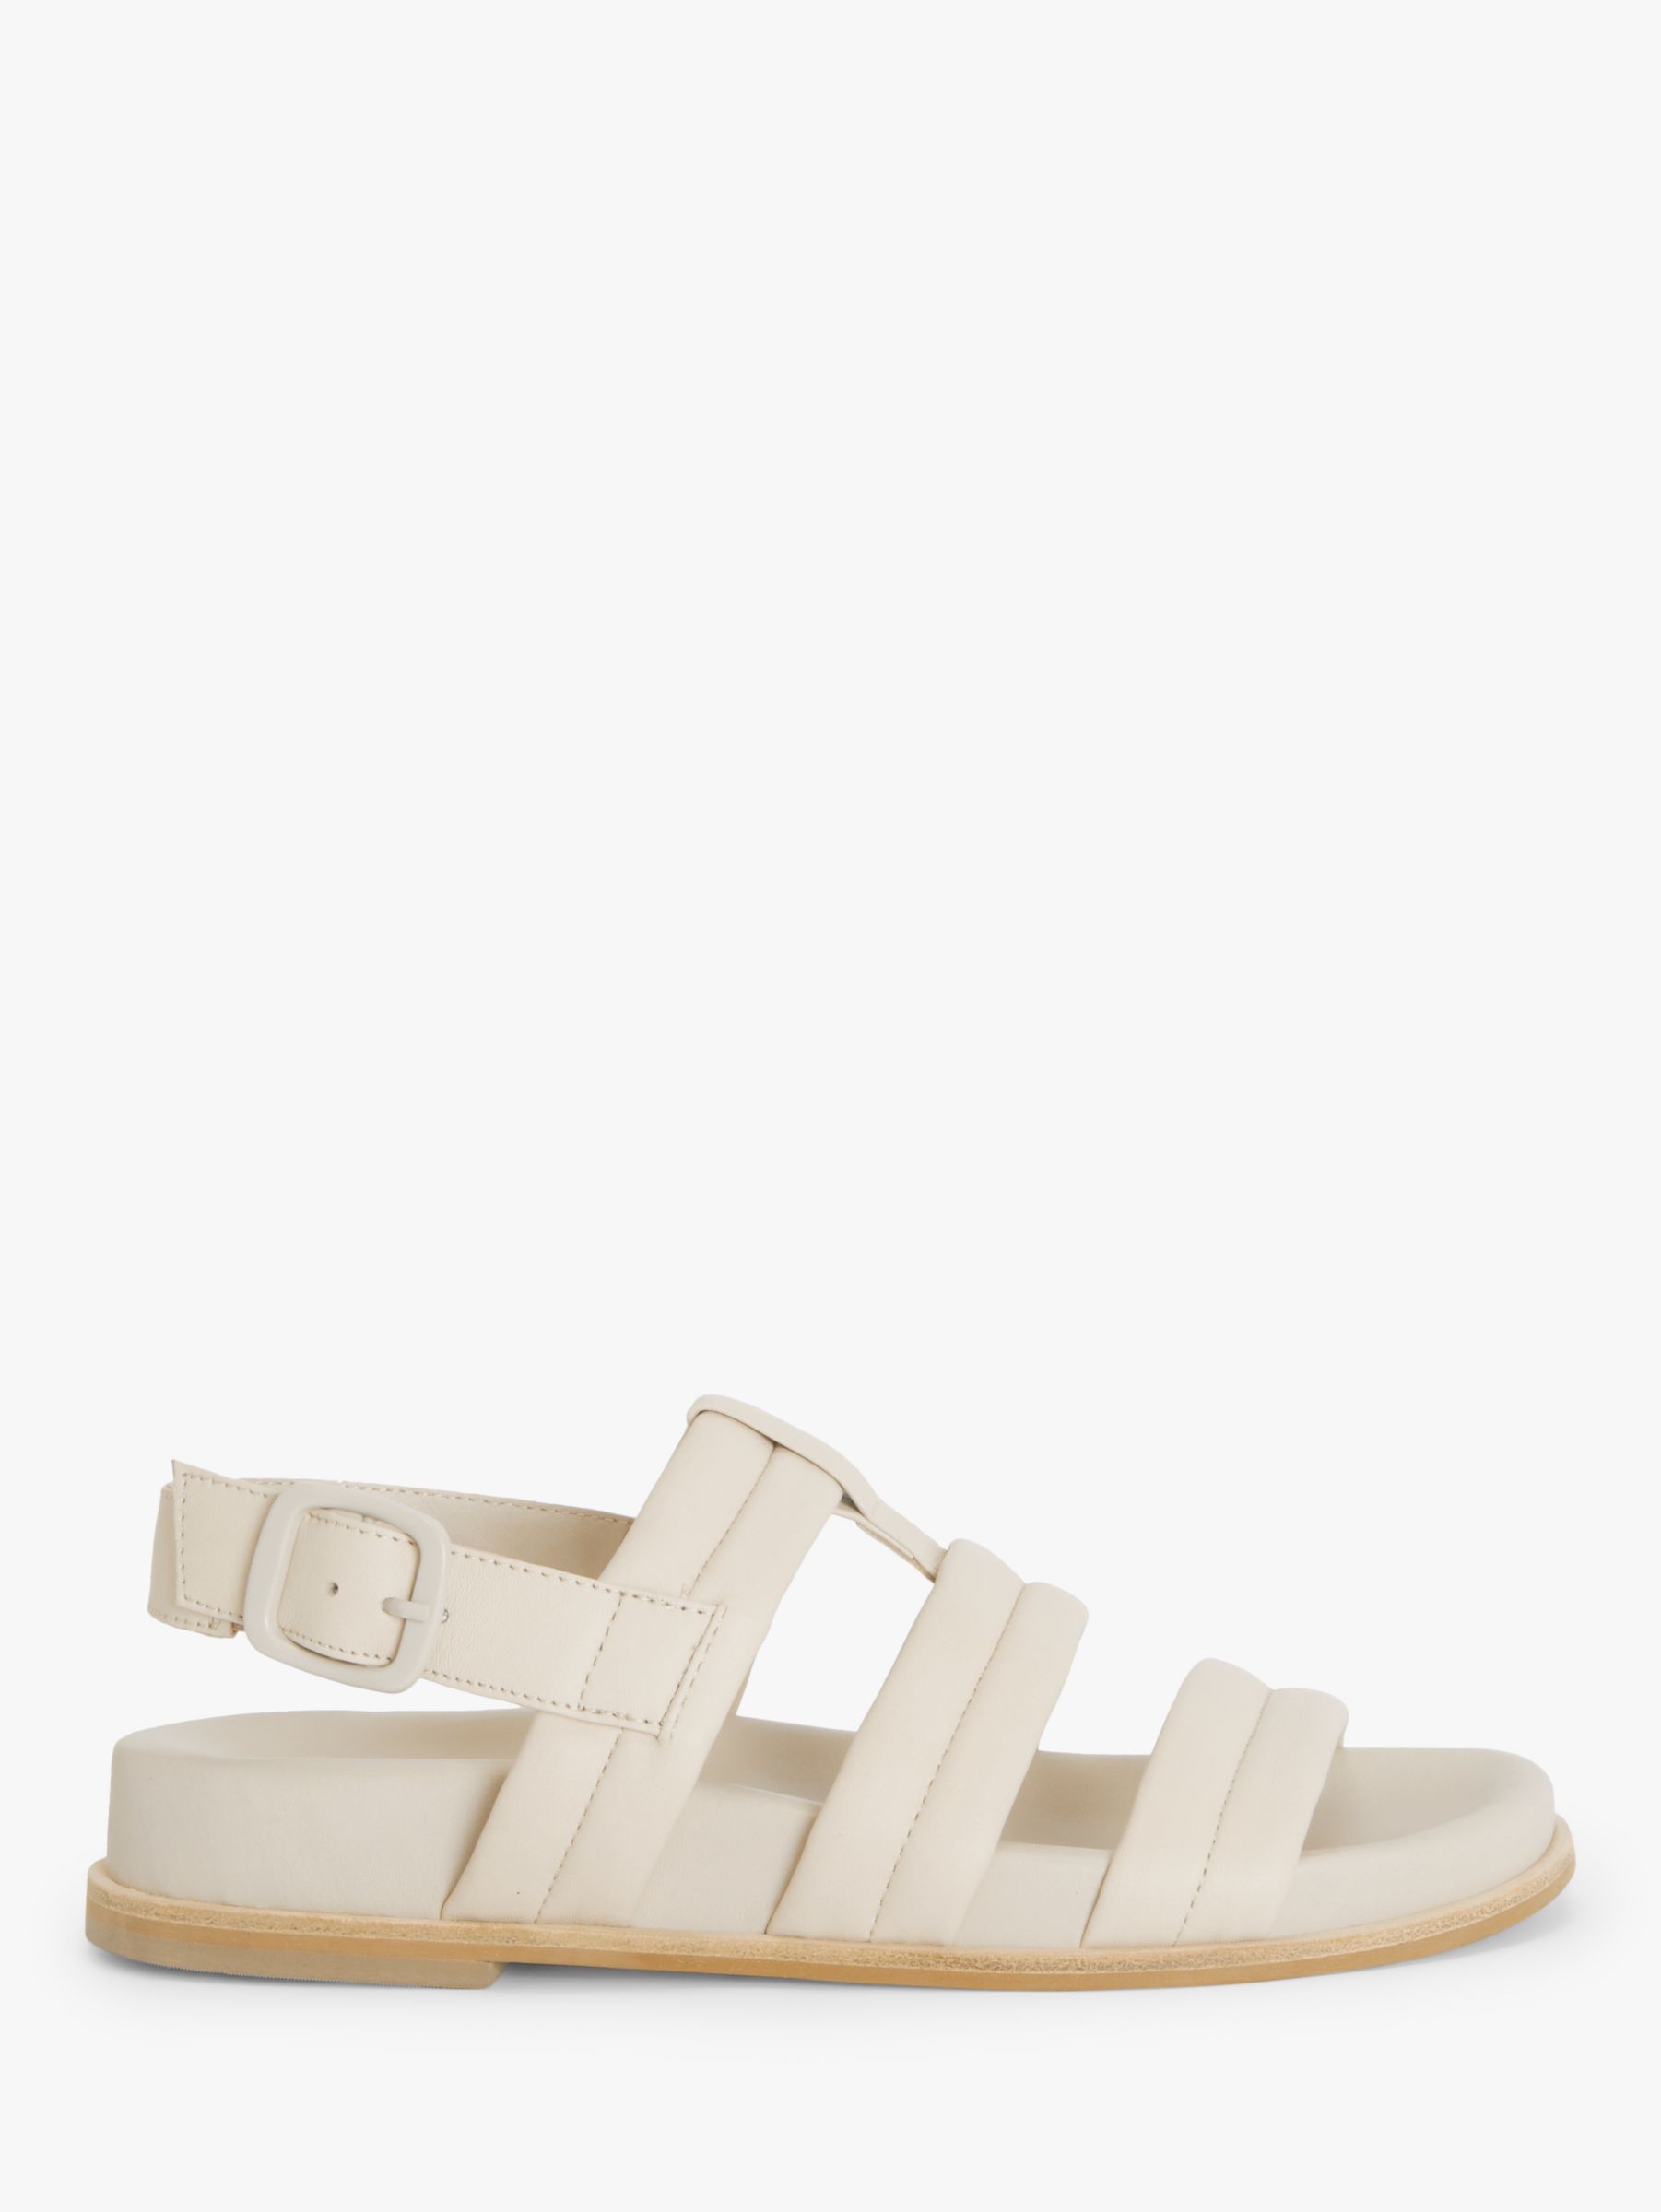 Kin Love Leather Footbed Sandals, Off White at John Lewis & Partners